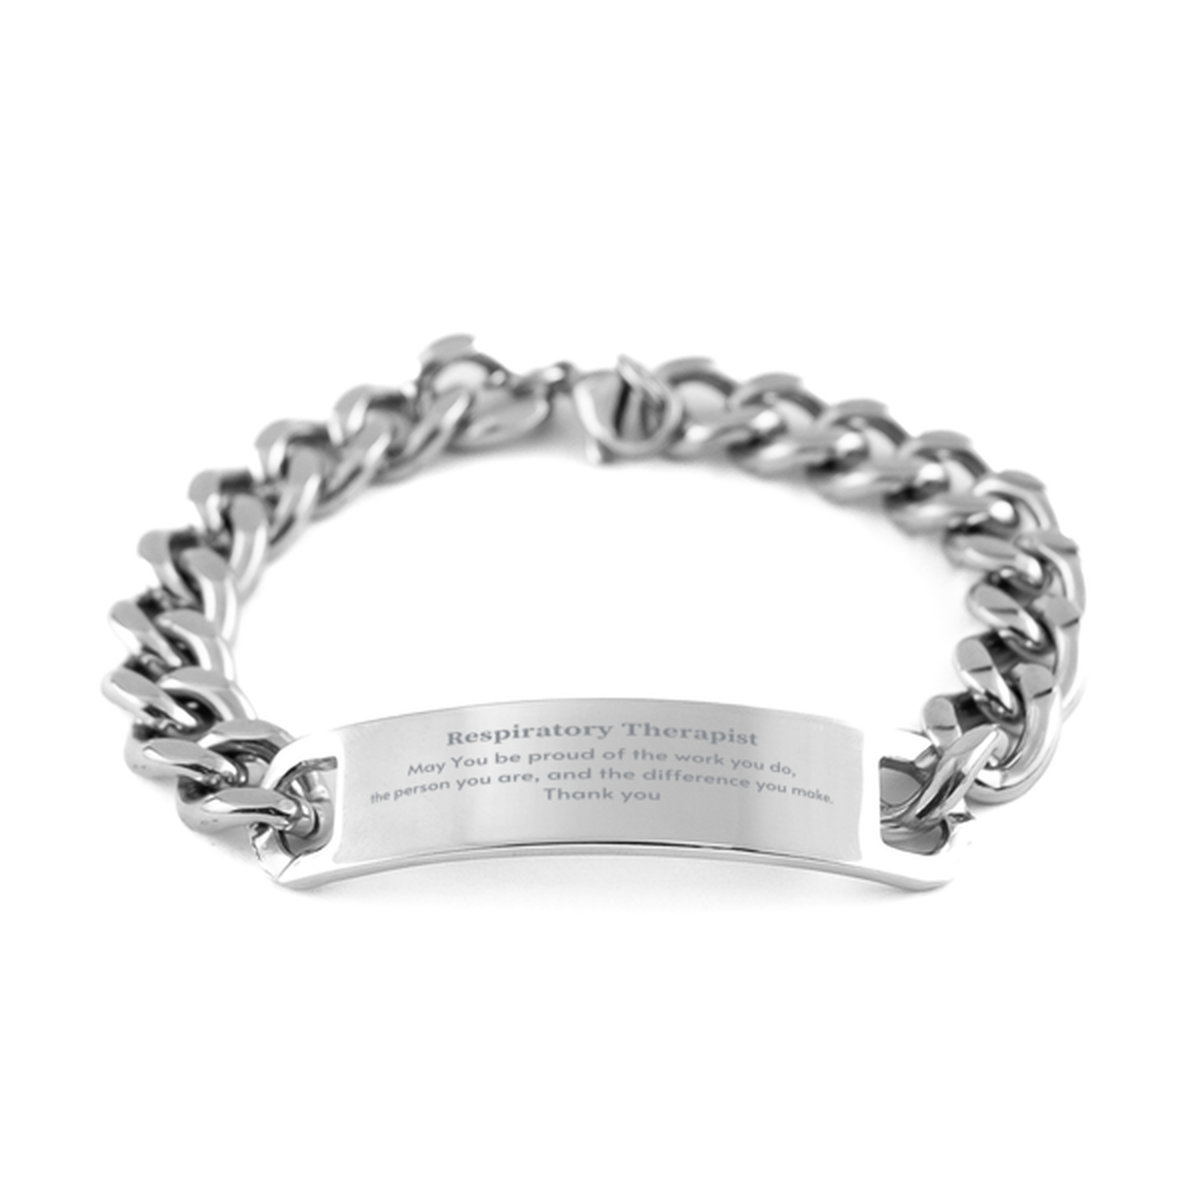 Heartwarming Cuban Chain Stainless Steel Bracelet Retirement Coworkers Gifts for Respiratory Therapist, Respiratory Therapist May You be proud of the work you do, the person you are Gifts for Boss Men Women Friends